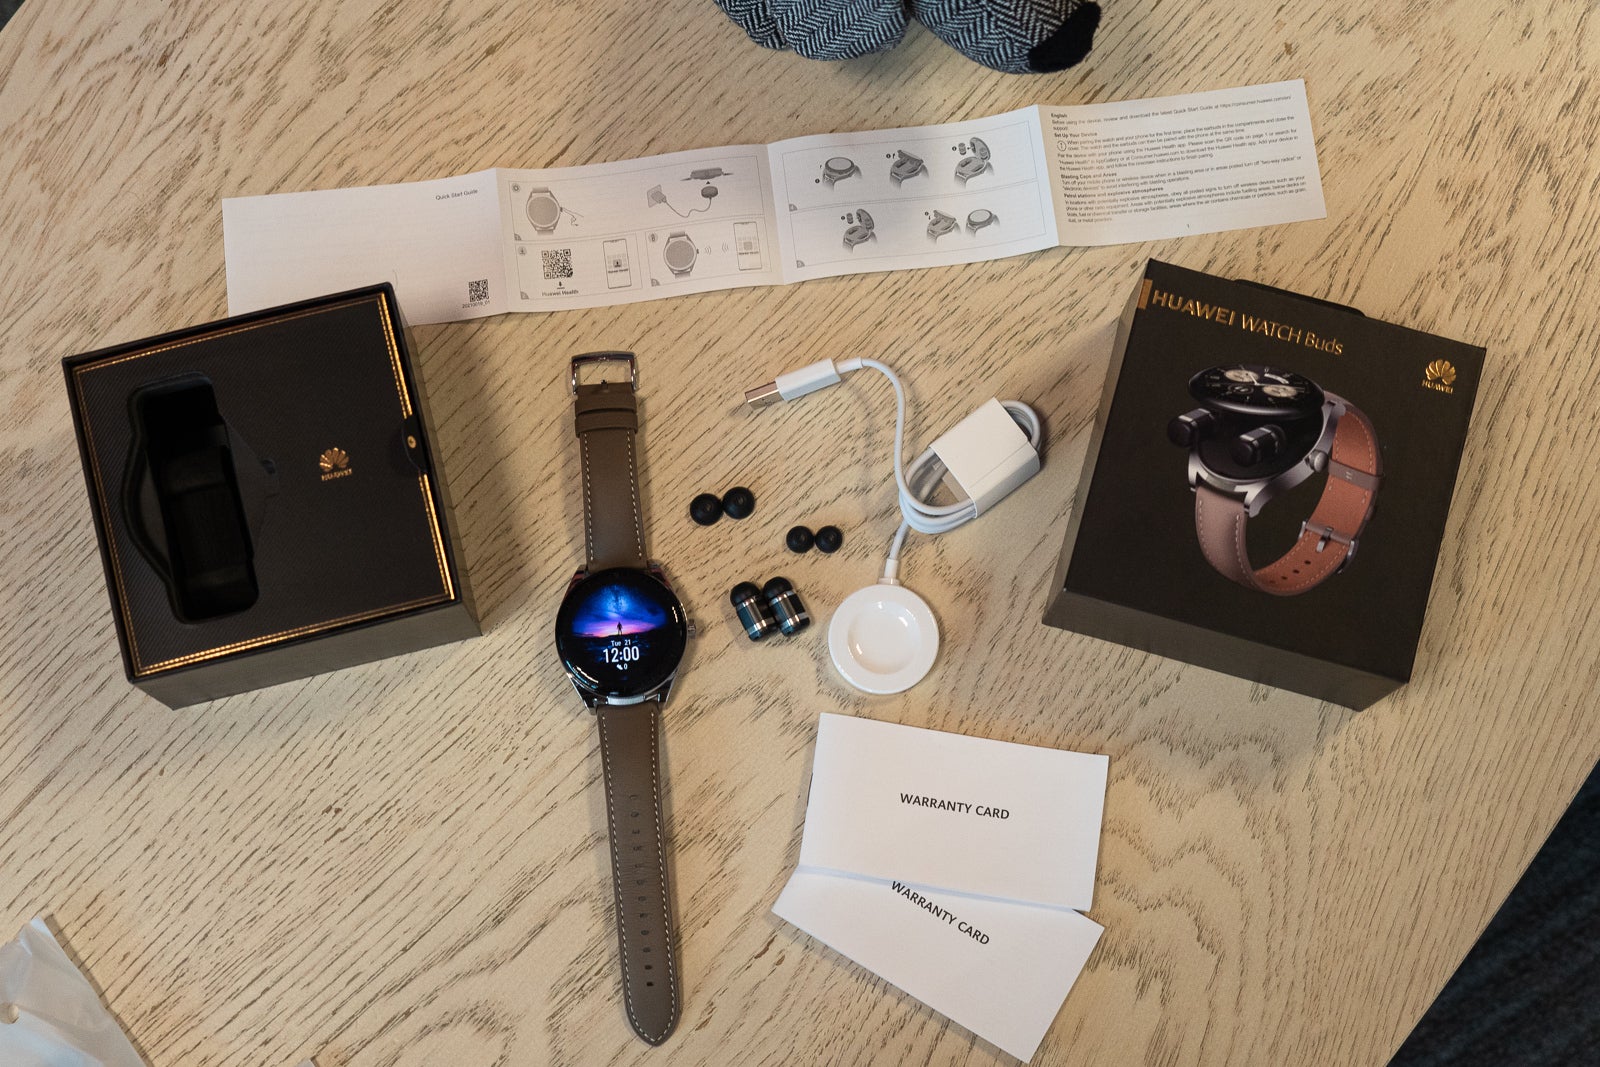 Huawei Watch Buds review: &quot;The name's Bond, James Bond!&quot;